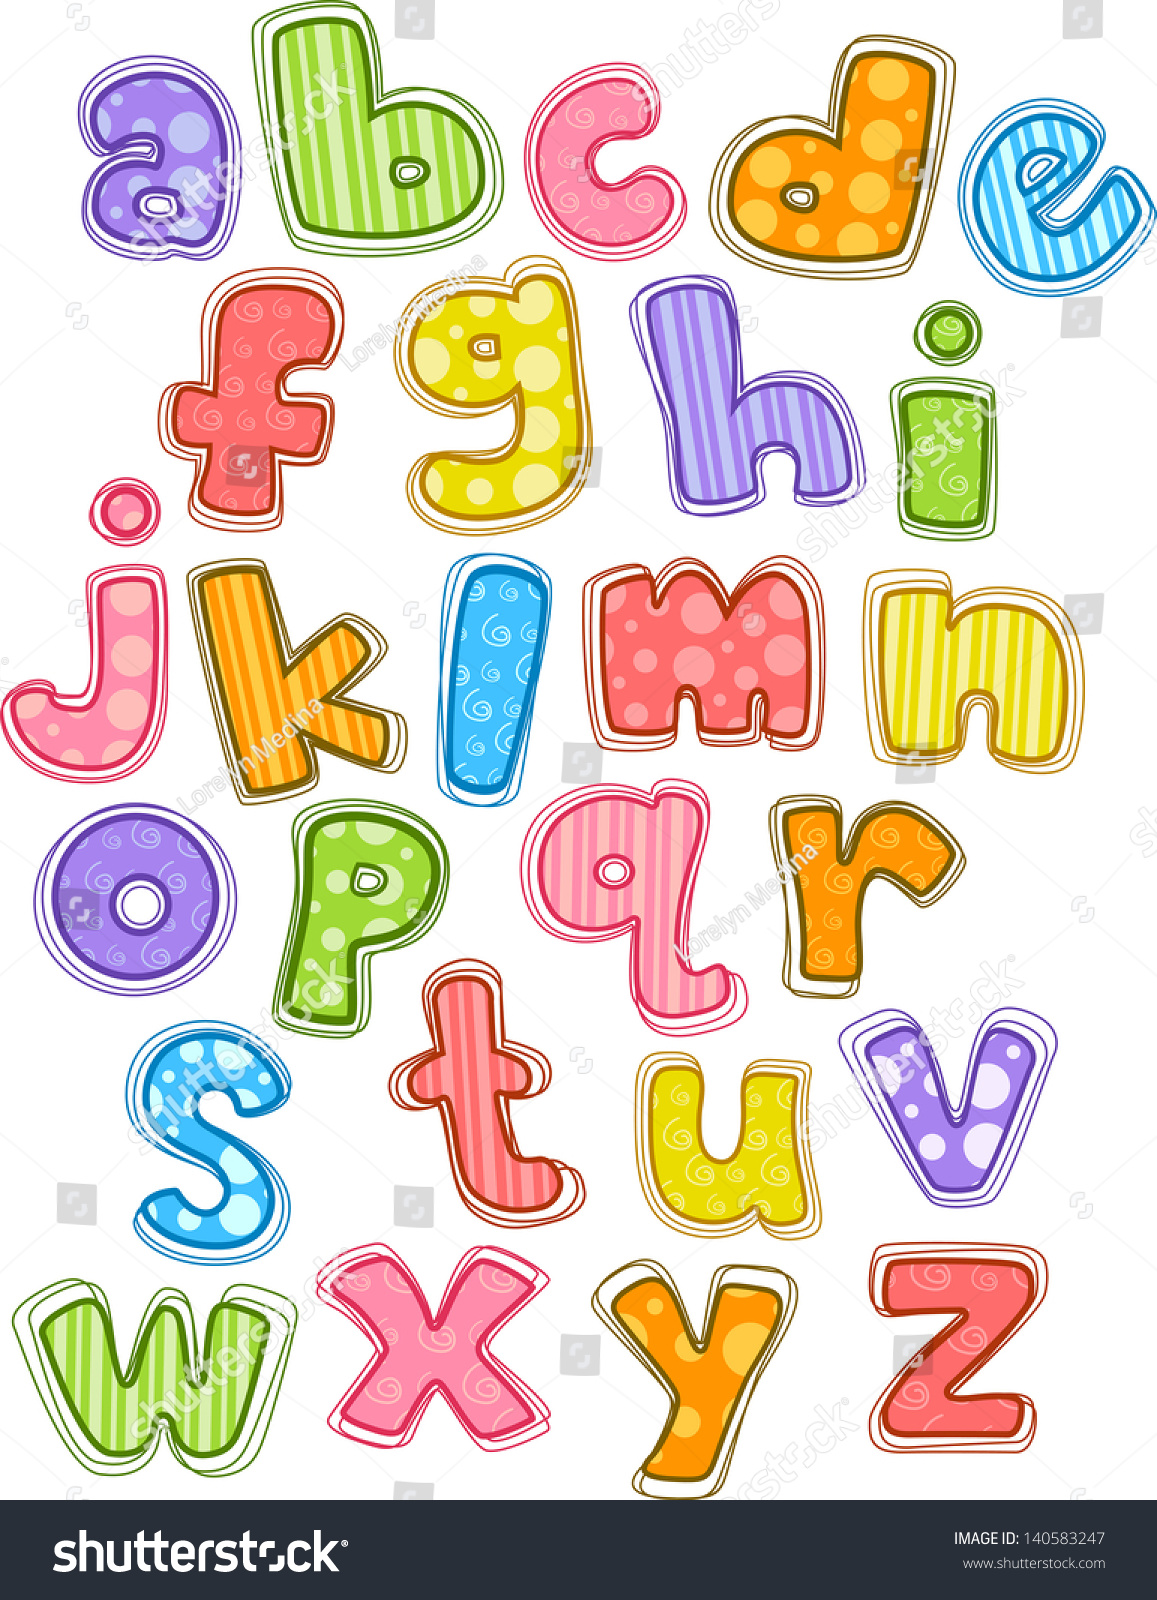 Illustration Of Cute And Colorful Alphabet In Lower Case - 140583247 ...